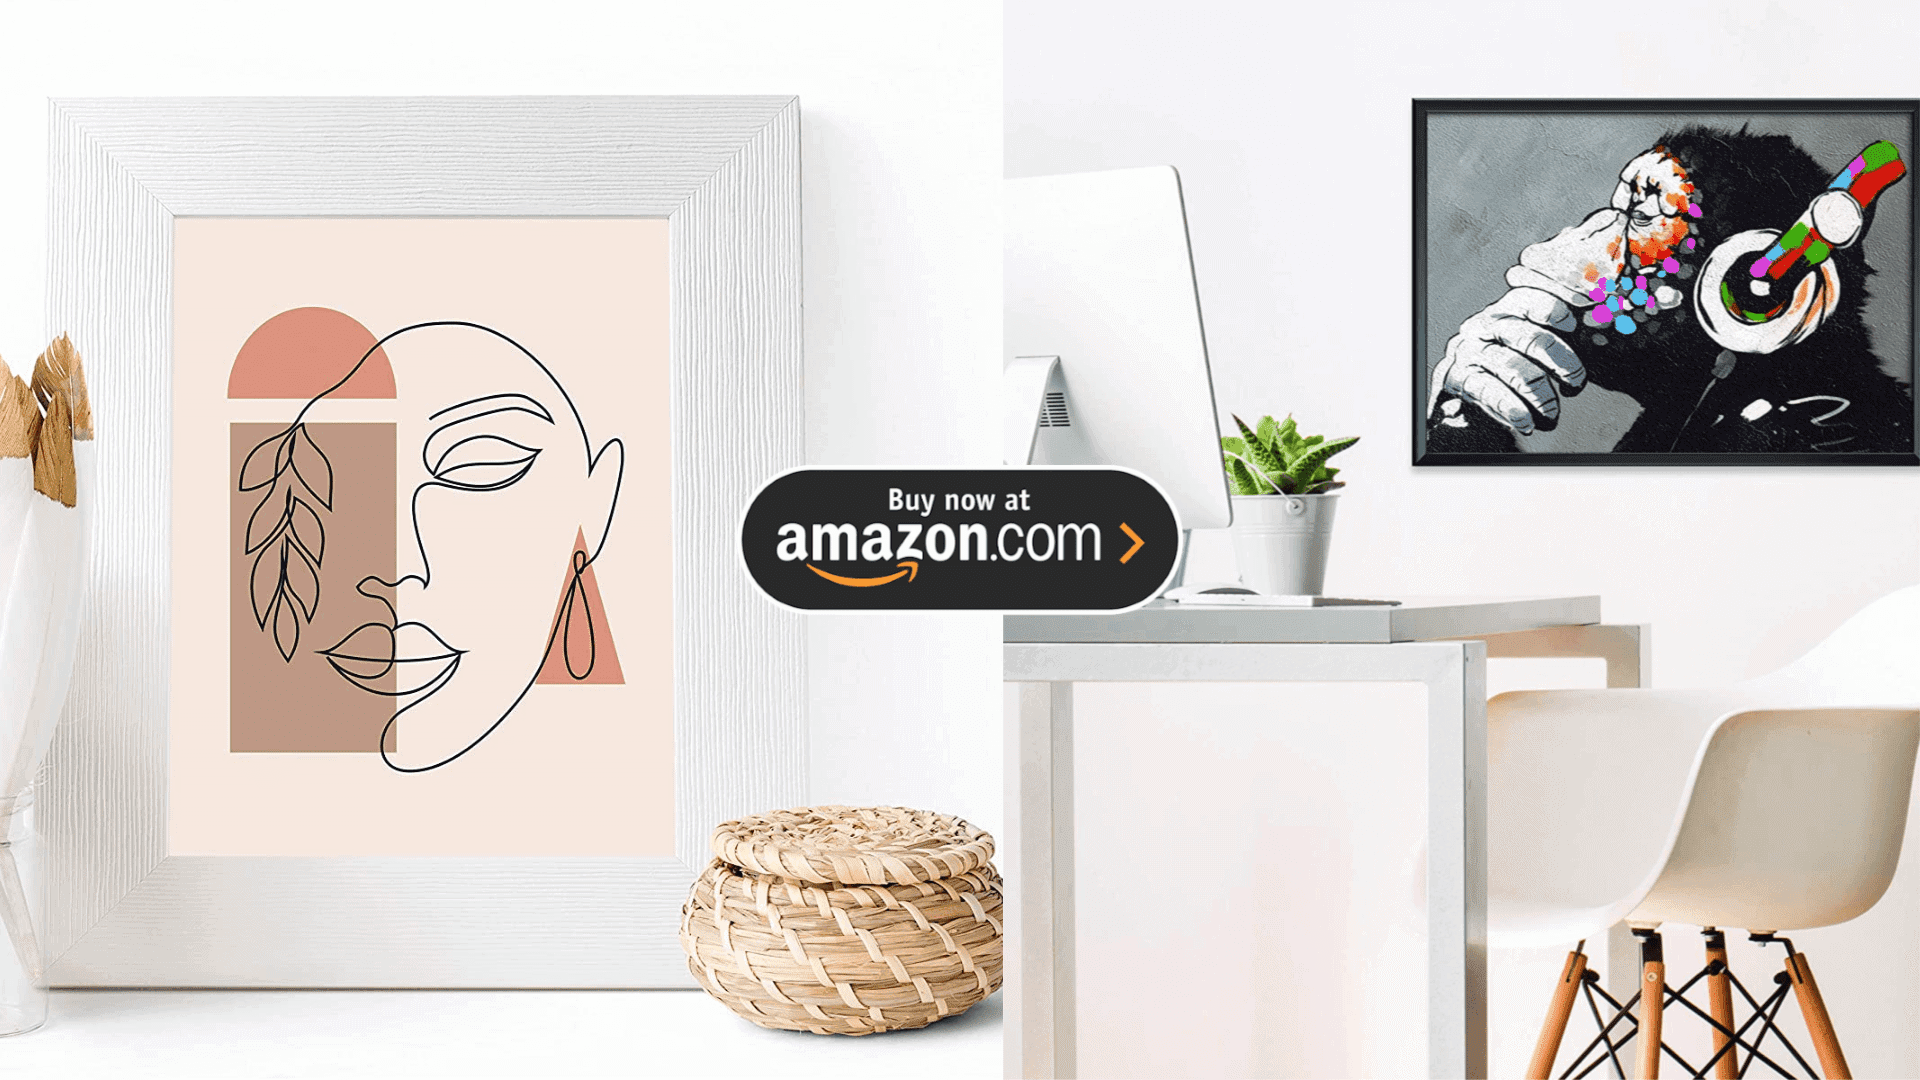 College Wall Art & Posters Sold on Amazon